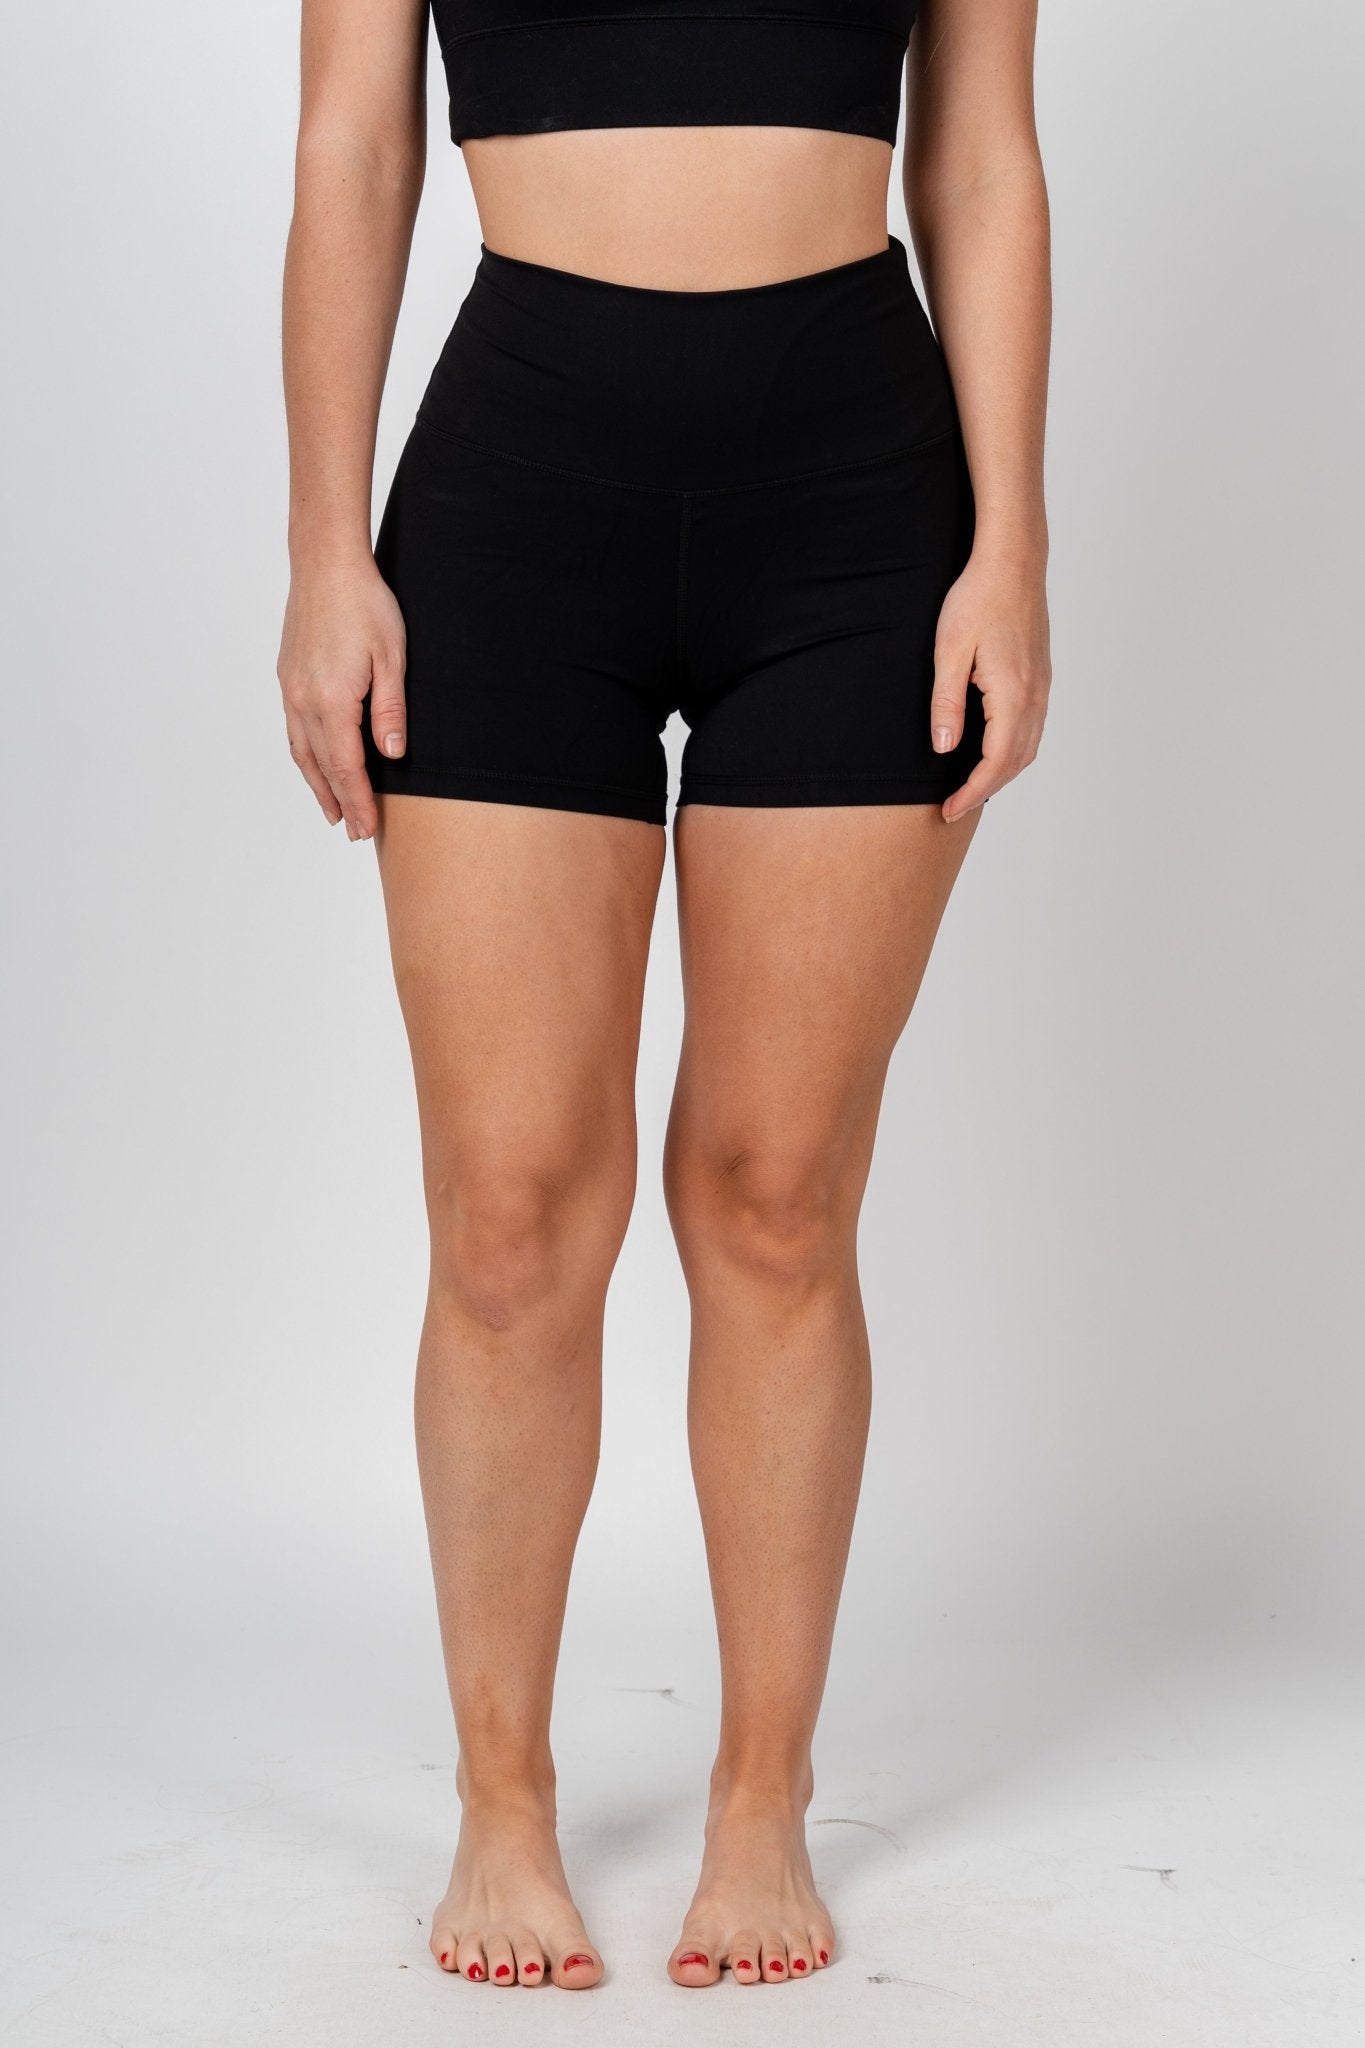 4 inch inseam biker shorts black - Affordable biker shorts - Boutique Shorts at Lush Fashion Lounge Boutique in Oklahoma City